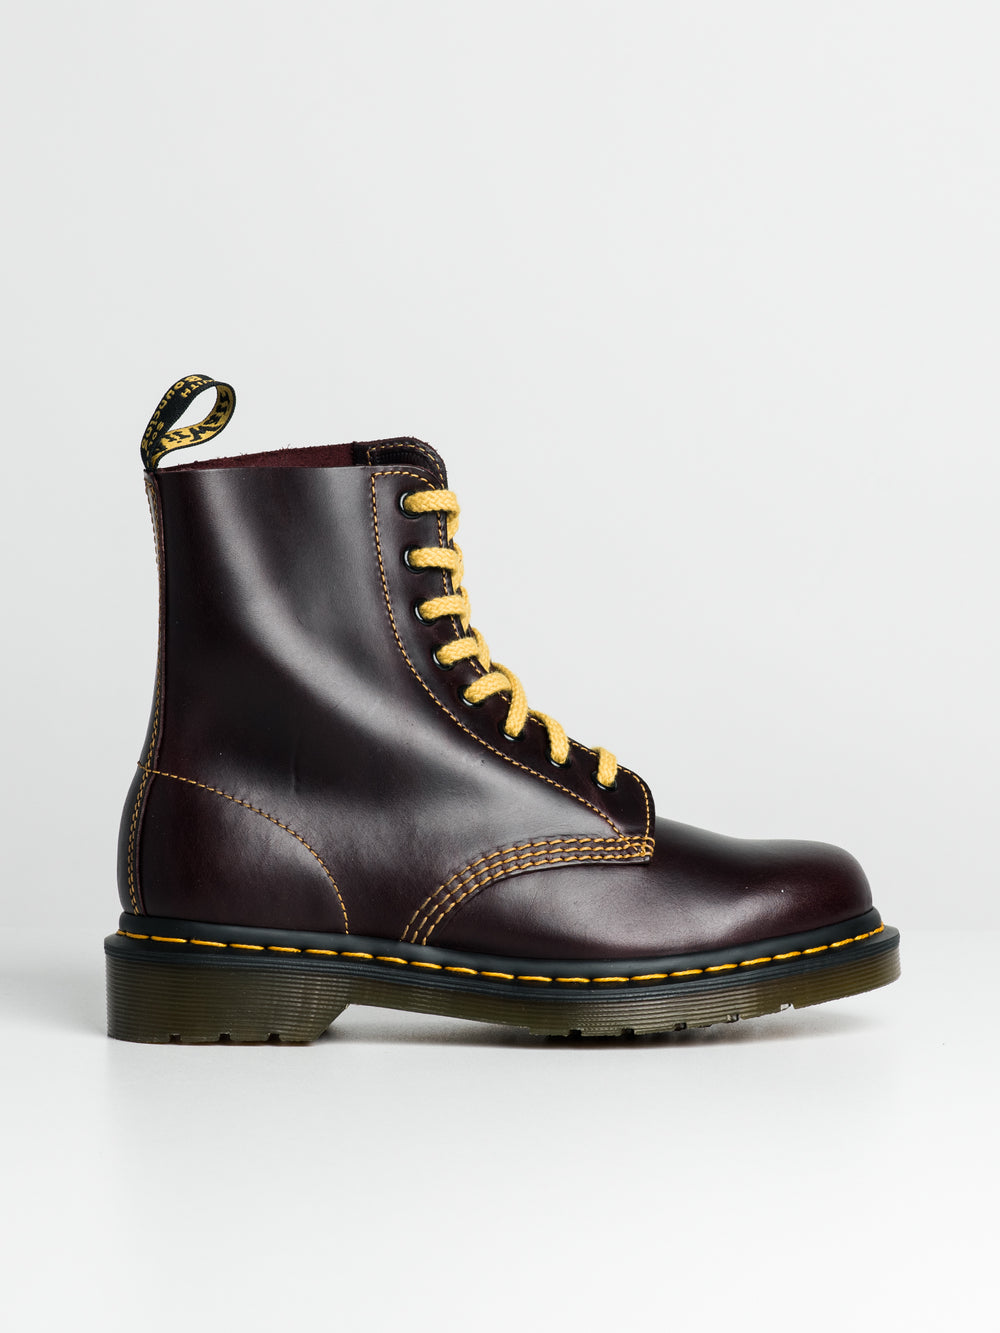 MENS DR MARTENS 1460 PASCAL BOOT - CLEARANCE